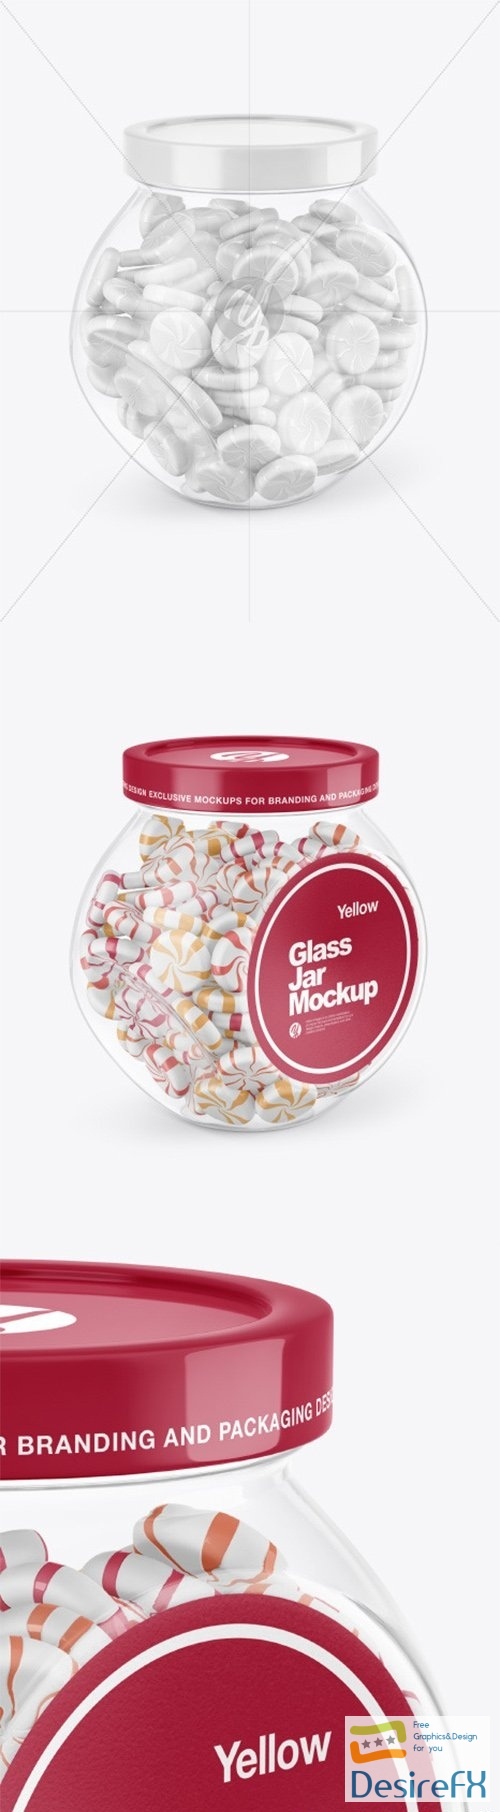 Glass Jar With Candies Mockup 63767